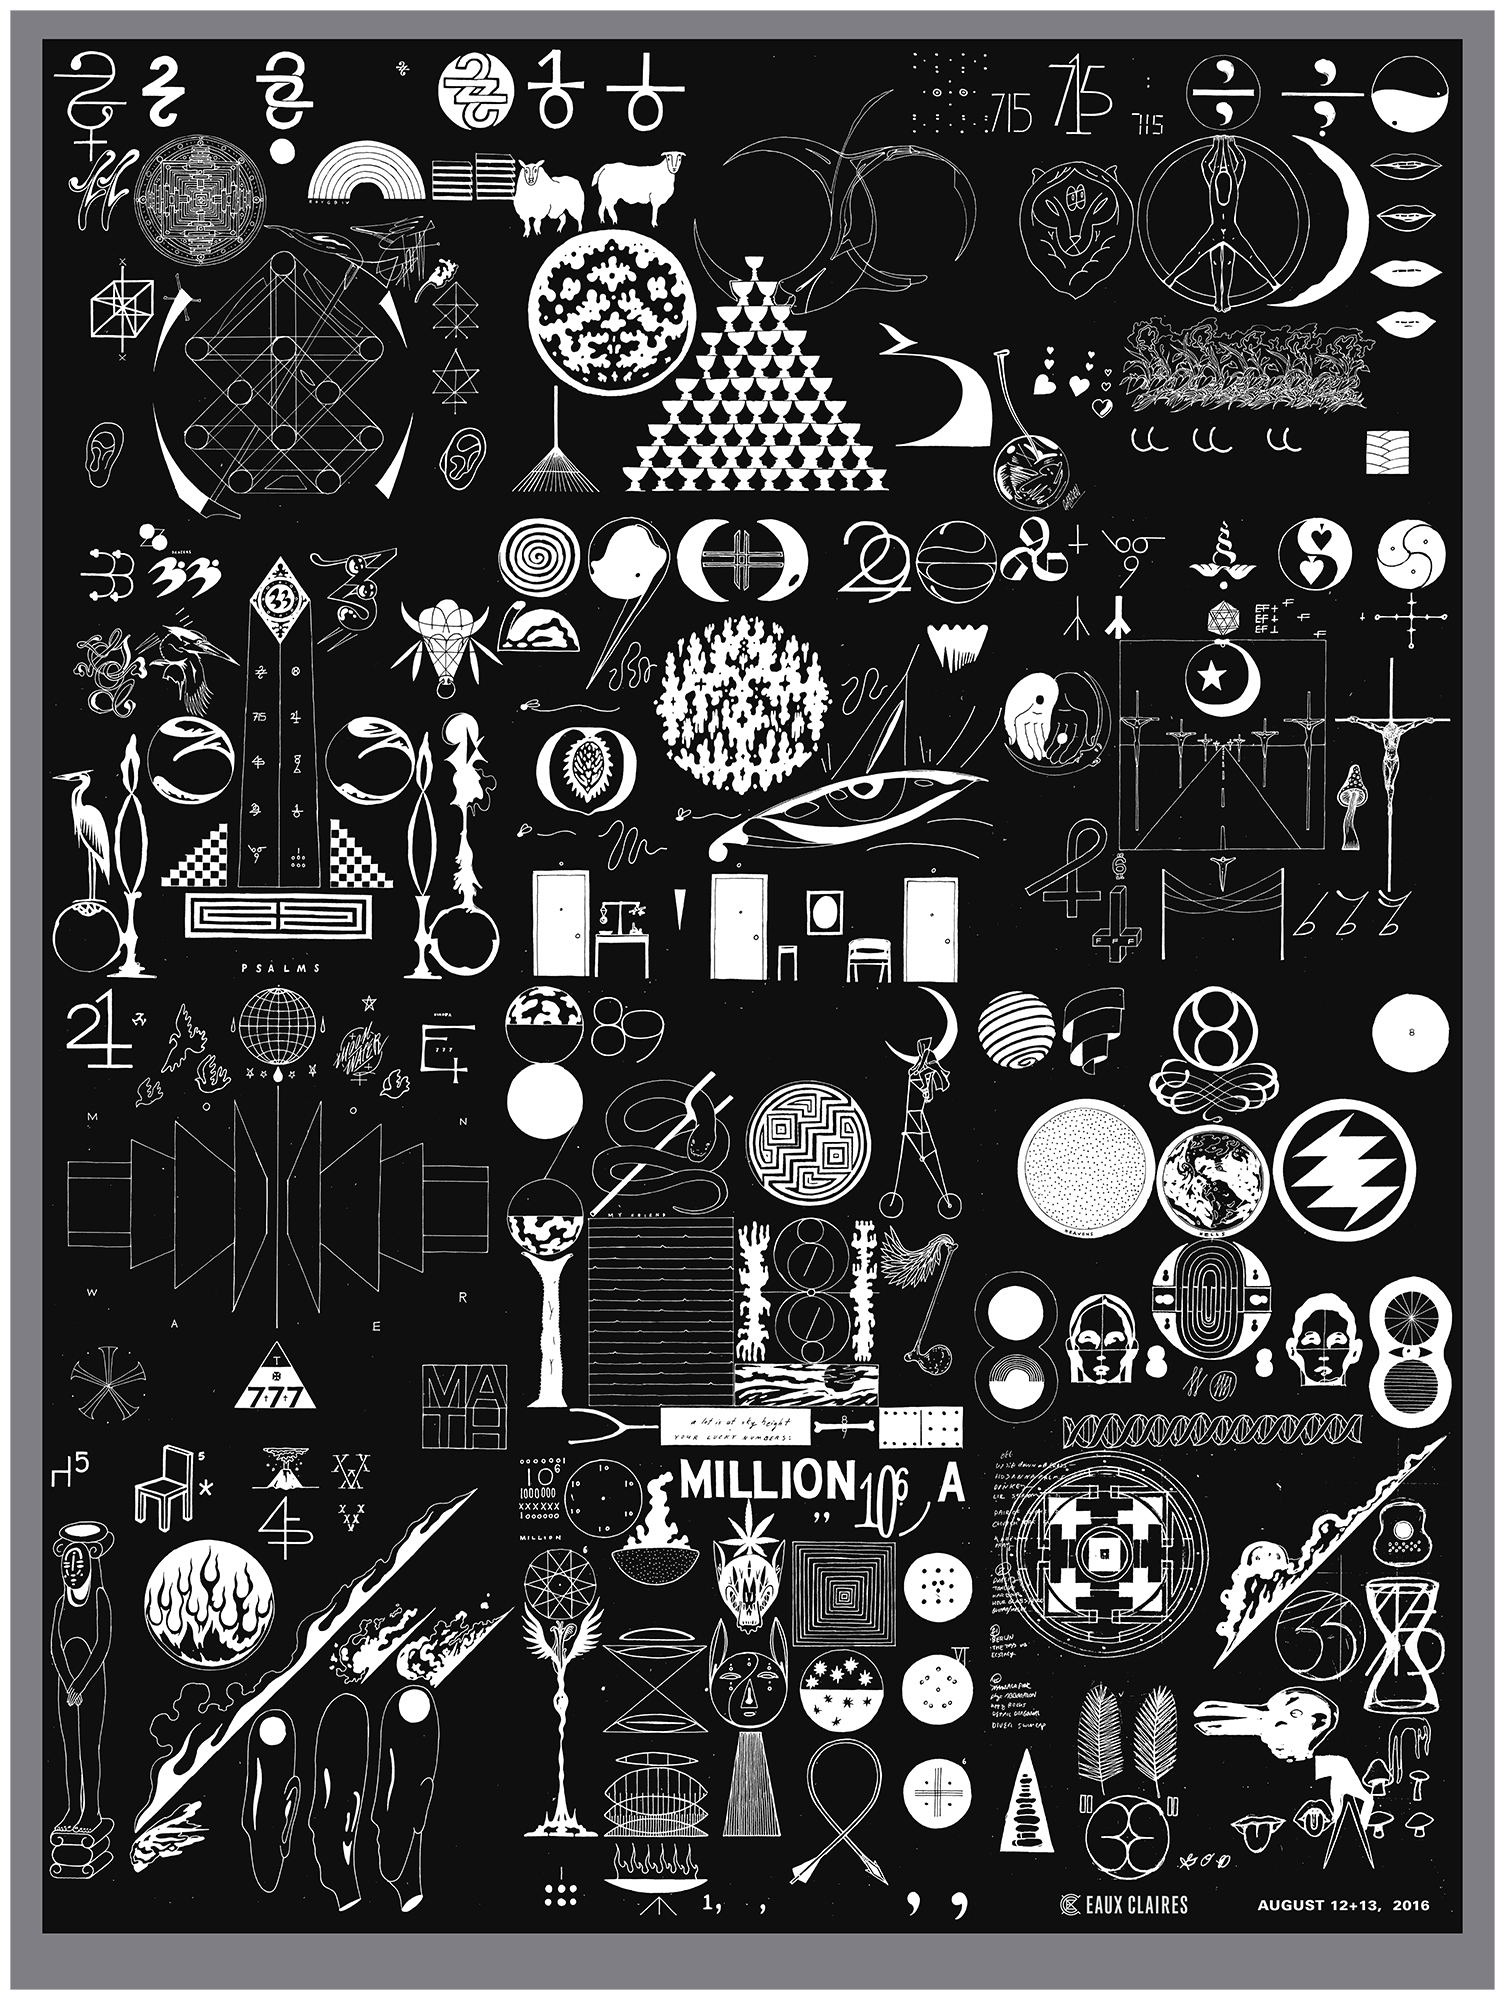 assortment of symbols and shapes on a poster